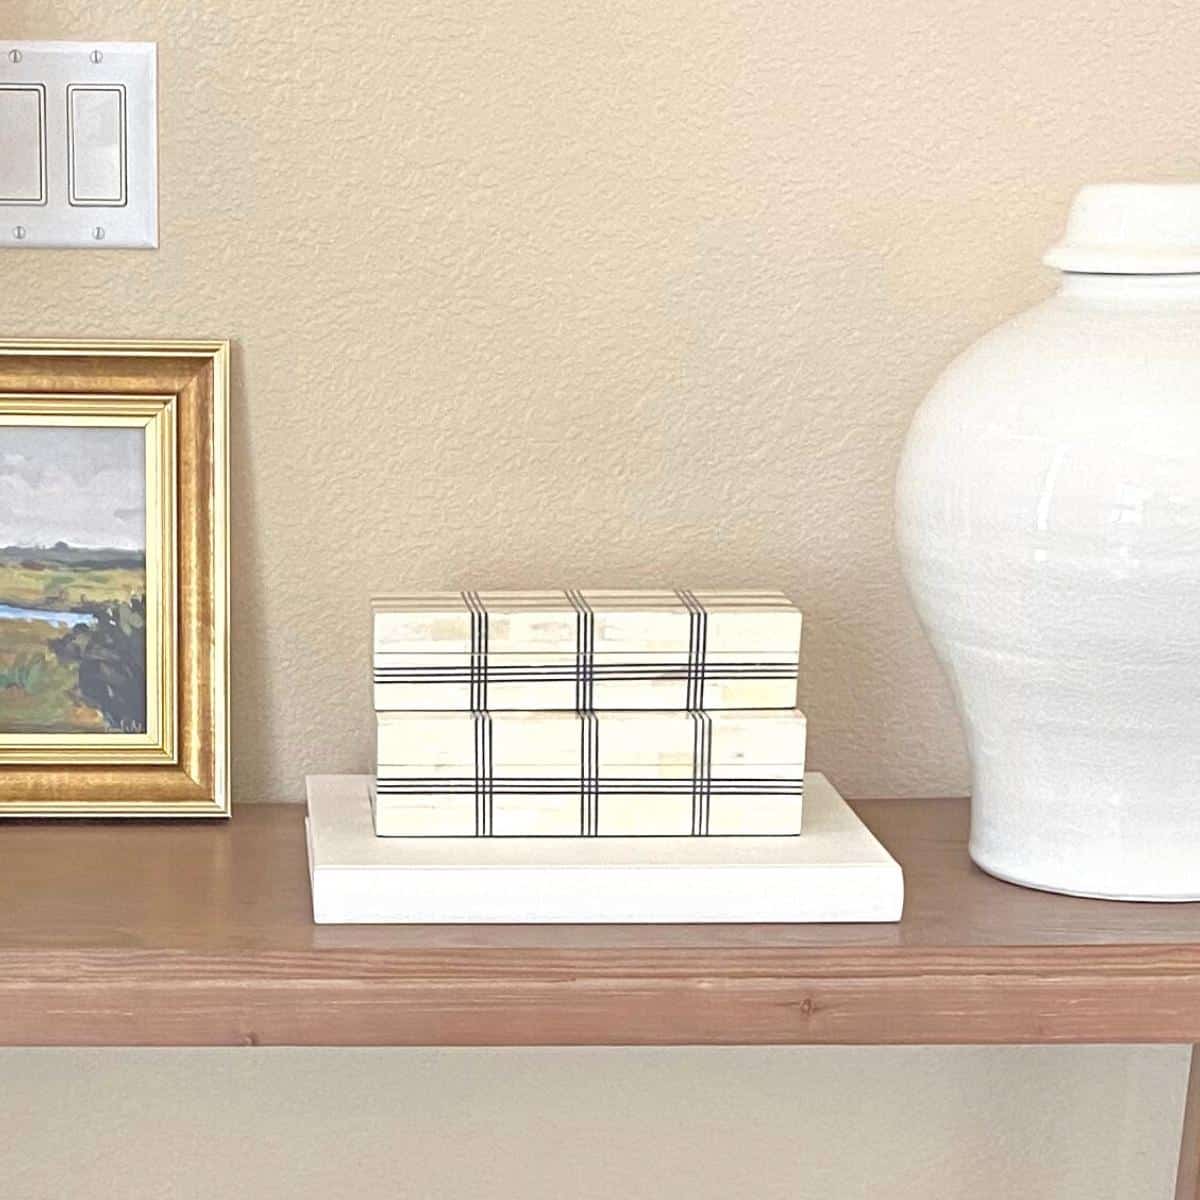 Wide grid box boxes atop a white book, flanked by small gold framed art on the left and a large white vase on the right